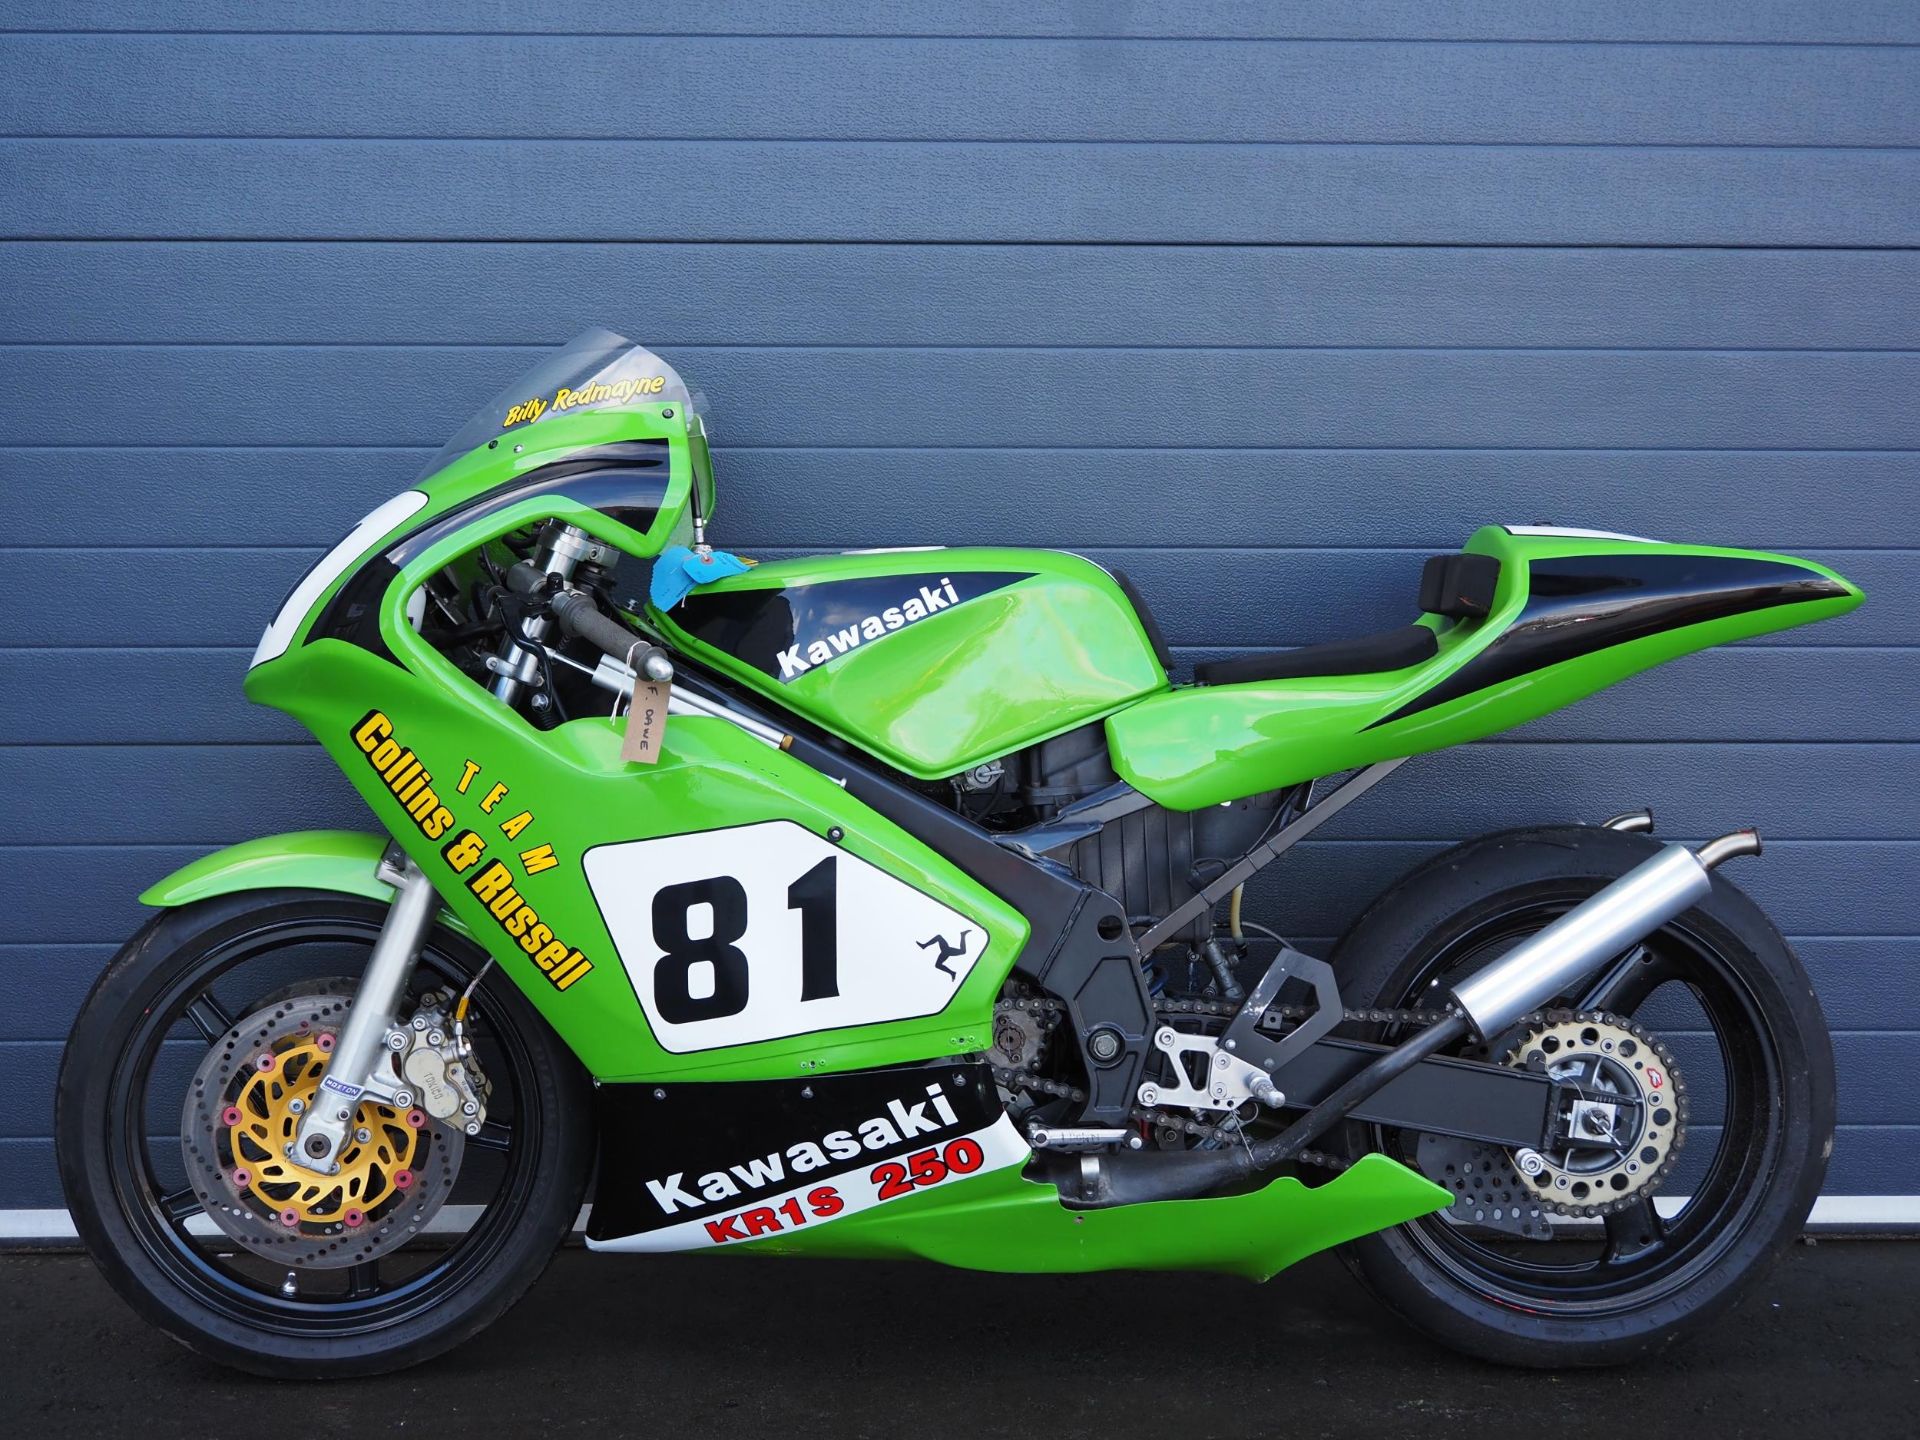 Kawasaki KR1-S 250 F2 motorcycle. 1992 This bike was ridden by Billy Redmayne at the 2015 Classic F2 - Image 7 of 8